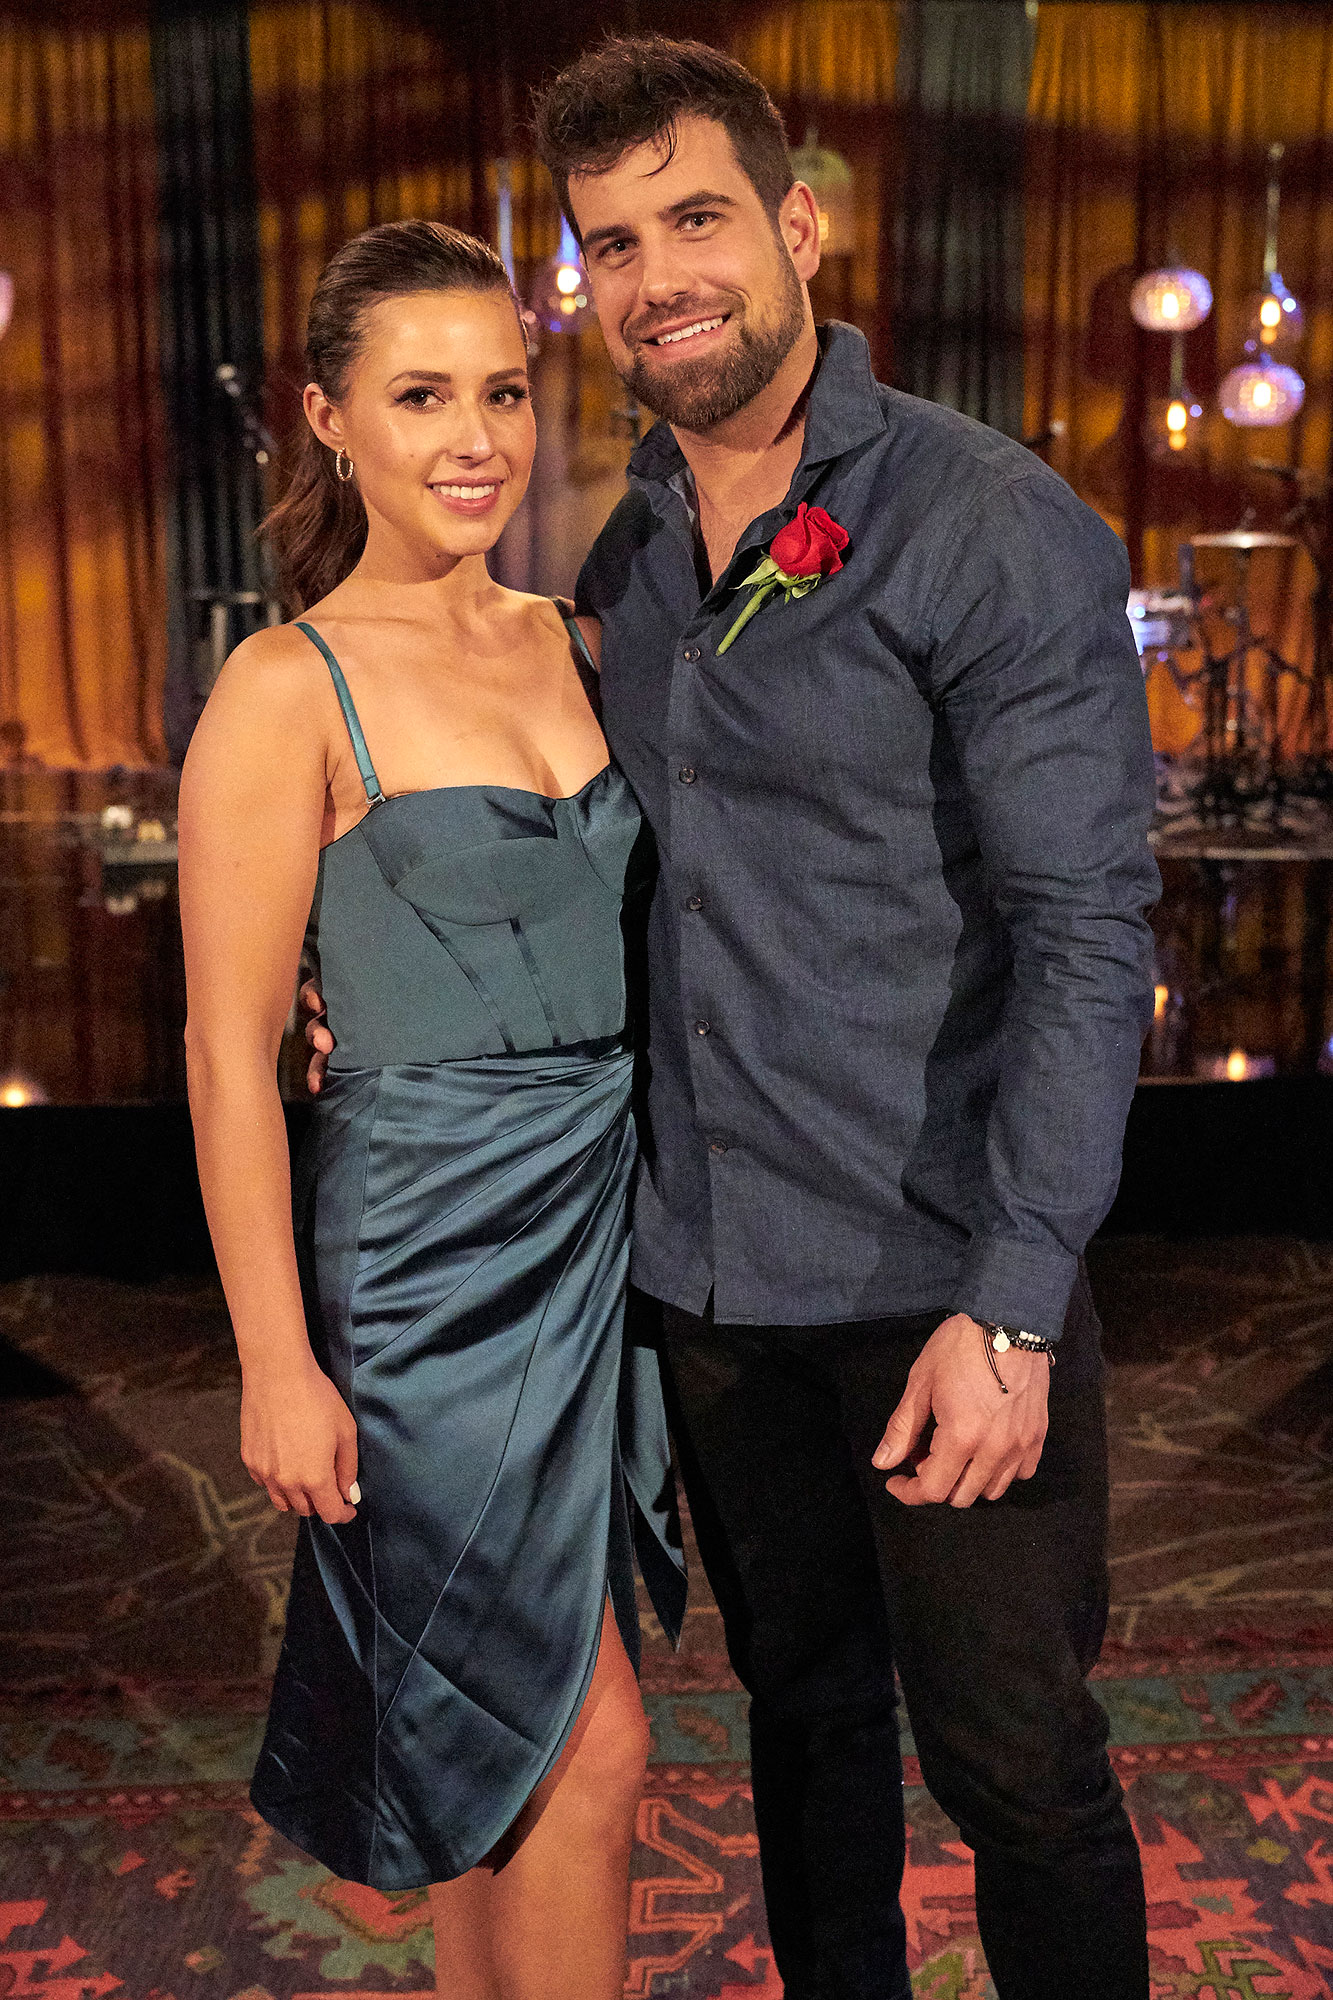 Katie Thurston and Blake Moynes Bachelorette After the Final Rose Revelations Feature